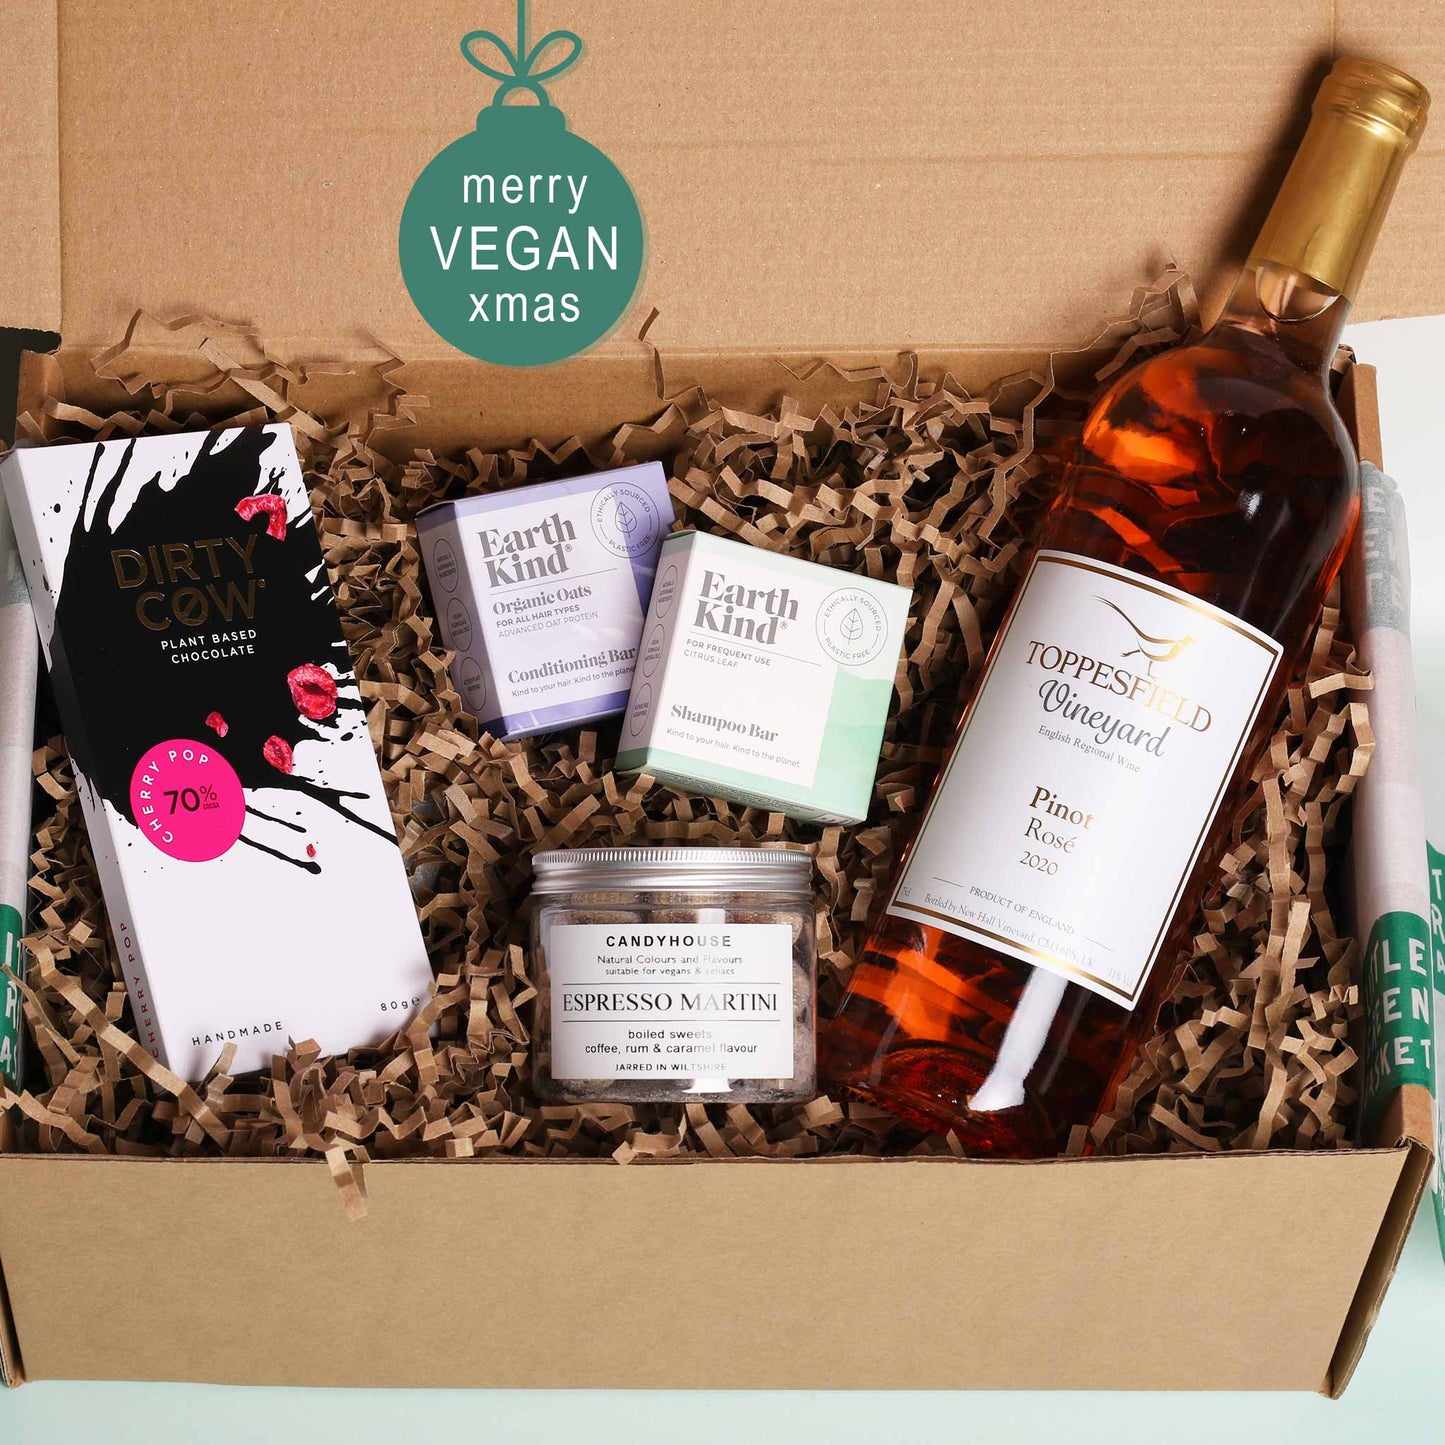 Vegan gift box for her has wine chocolate, sweets and haircare